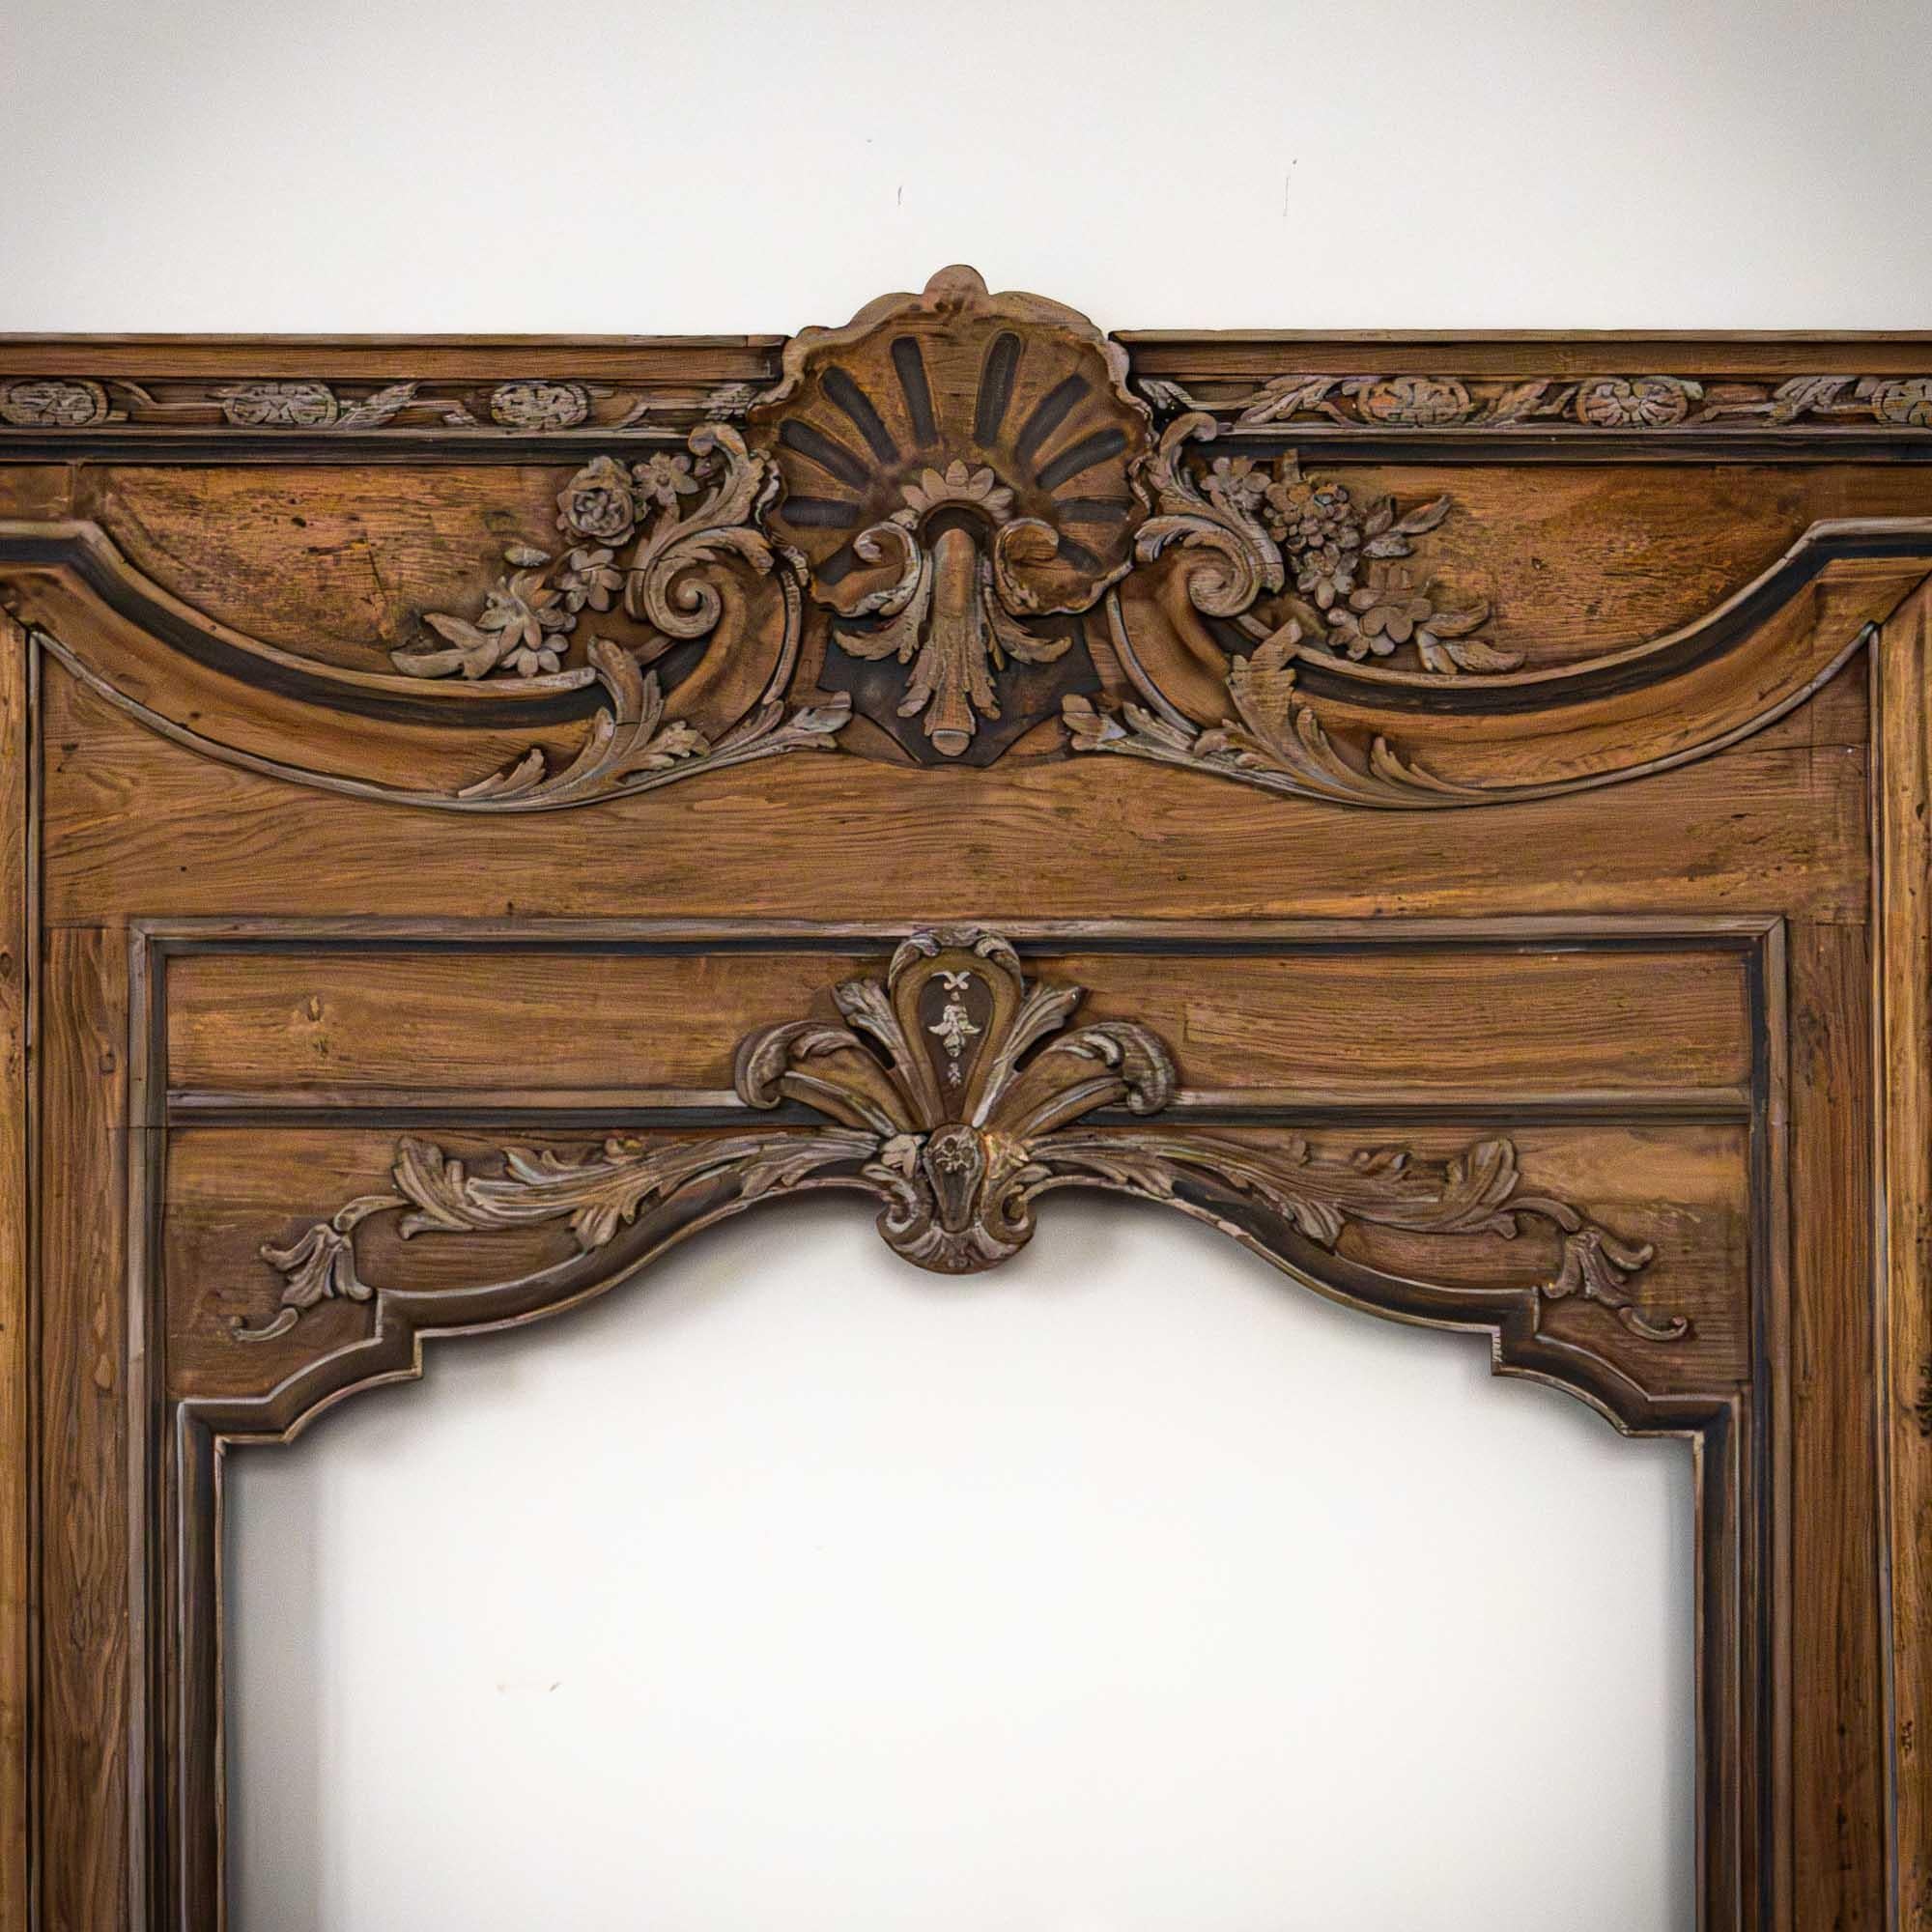 Large baroque fireplace surround of oak wood with carved and patinated floral bouquets, rocailles as well as central shell decoration with volutes and leaf tendrils. Total height: 242.5 cm; height of cornice: 124.5 cm; cut-out for mirror: 55 x 88